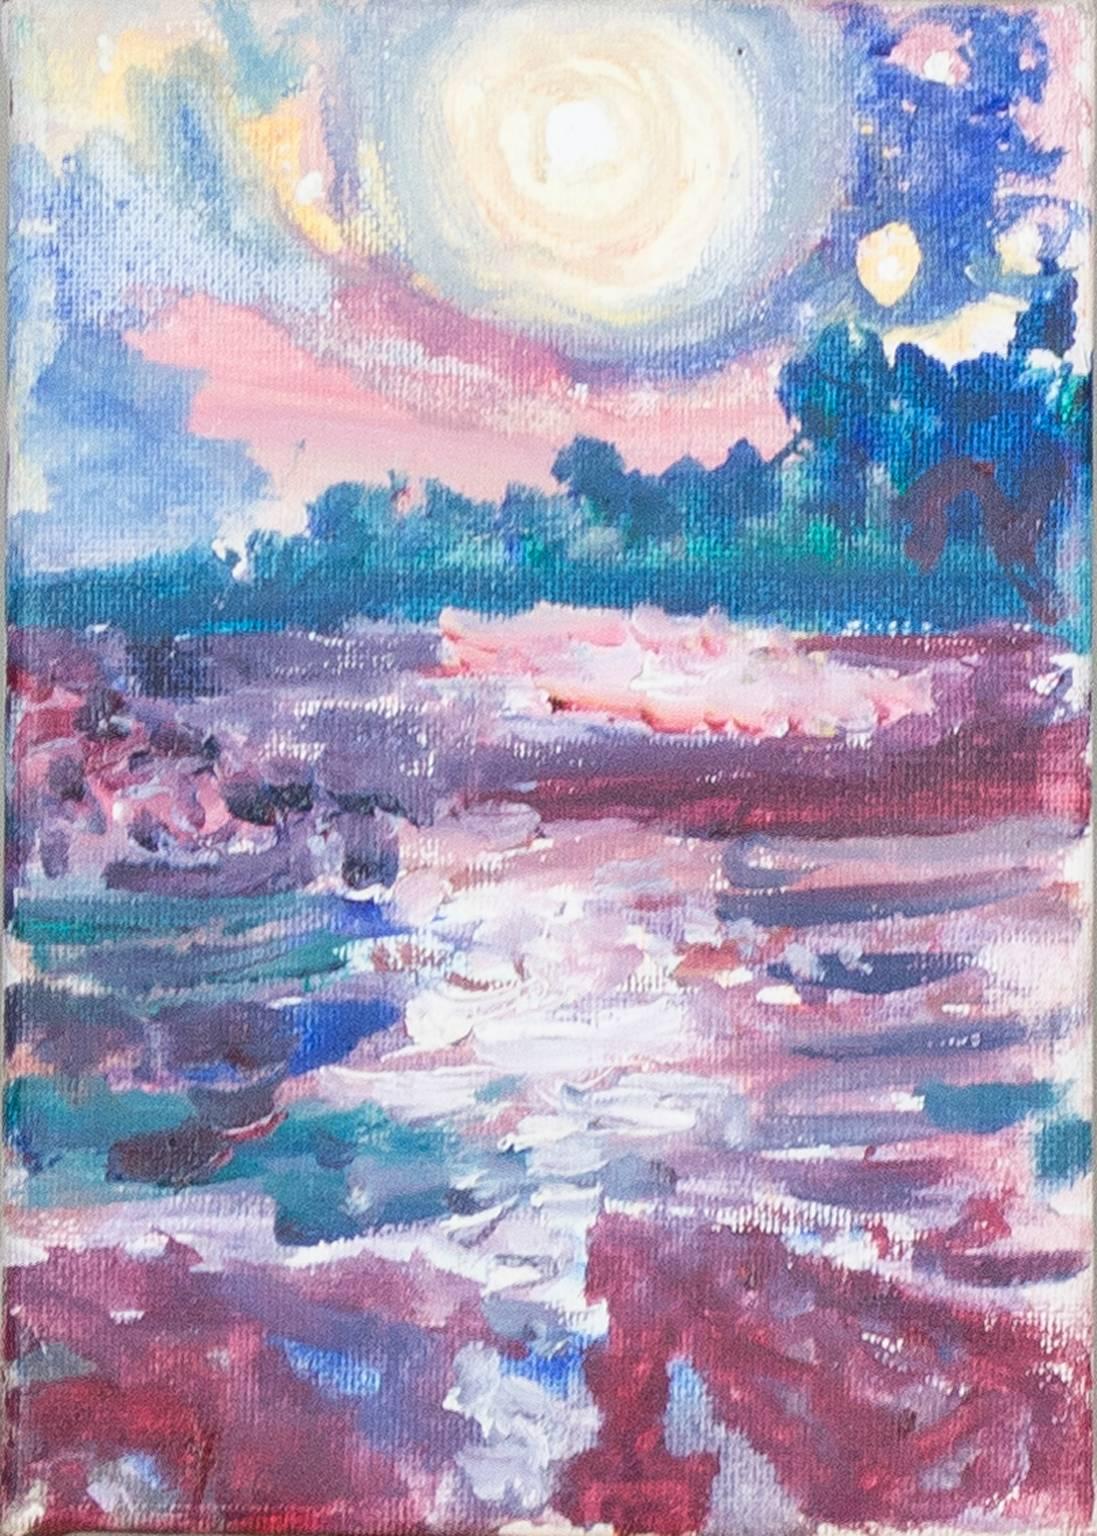 "The Moonlight Beside the Sea of Shining Light" is an original water-based oil paint on canvas by Helen Hulsey. The artist signed the piece on the back. It depicts moonlight reflecting on water. 

7" x 5" canvas

Helen Hulsey is a Milwaukee-based